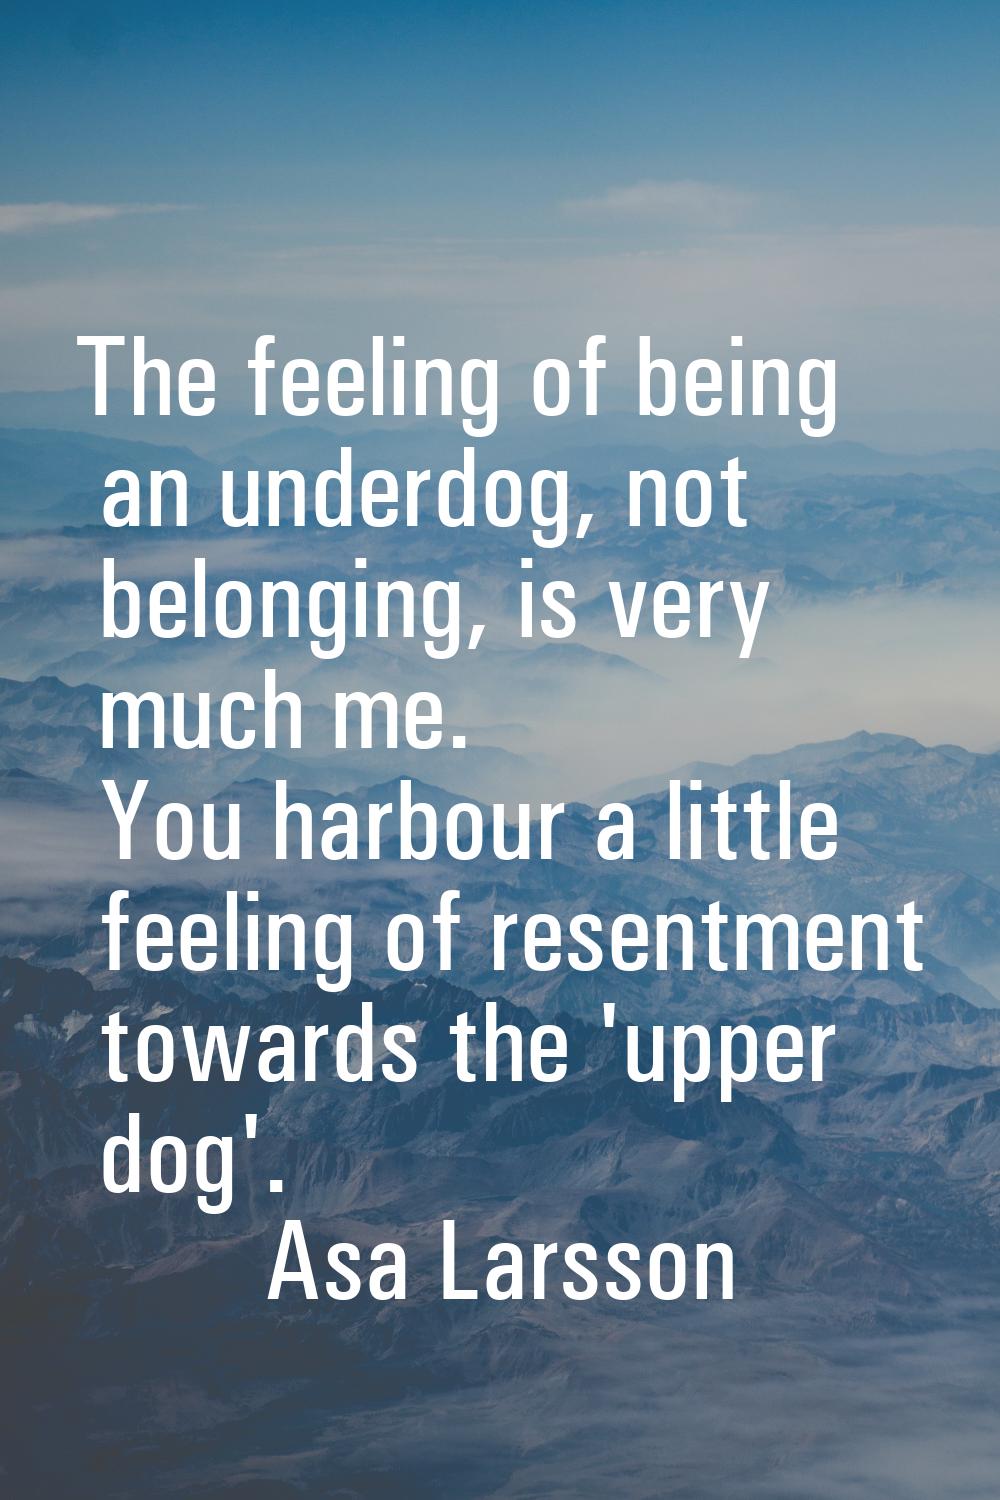 The feeling of being an underdog, not belonging, is very much me. You harbour a little feeling of r